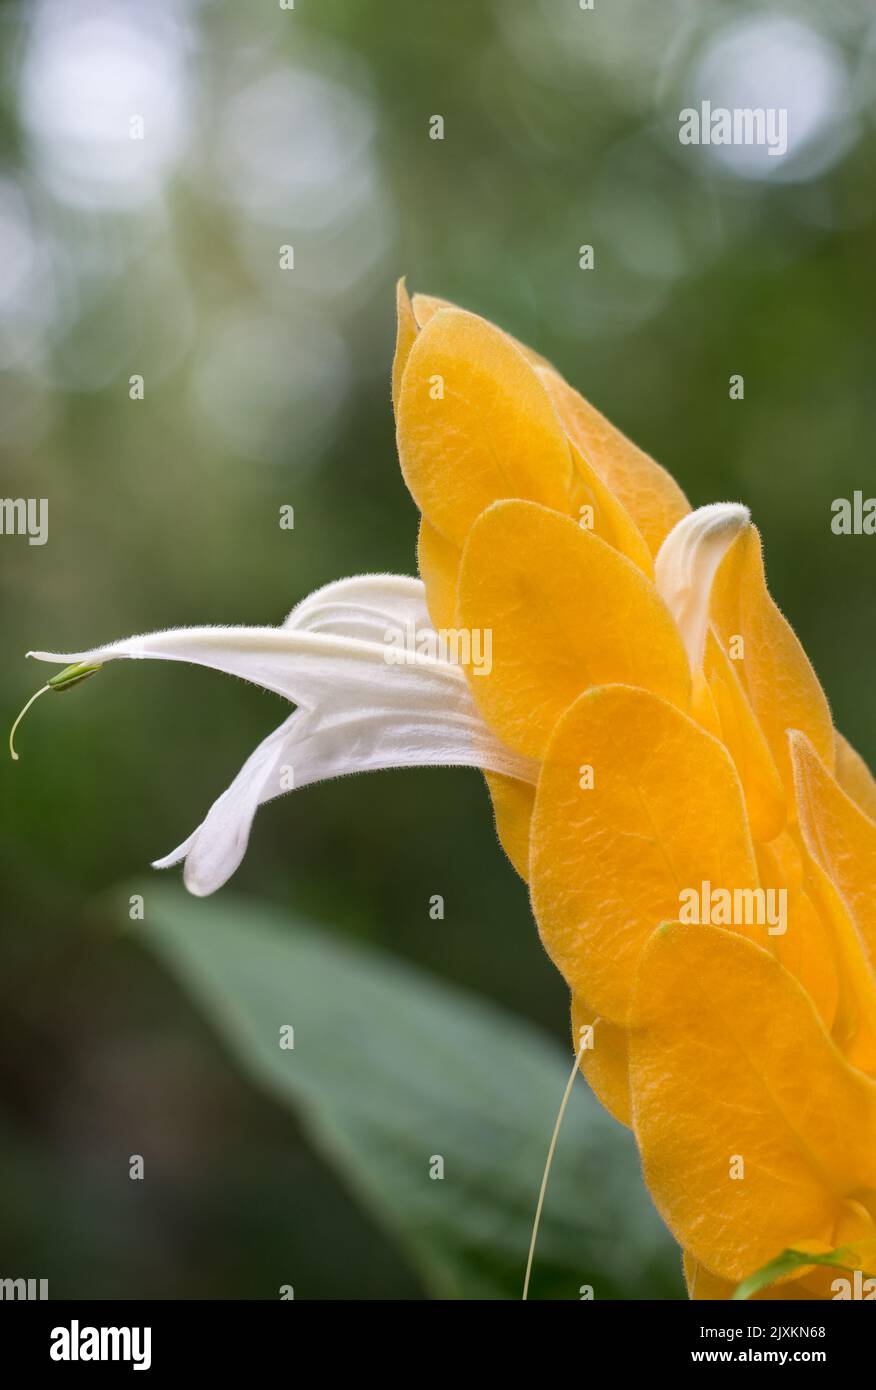 close-up of golden shrimp, pachystachys lutea, macro view of bright yellow bracts flower with white wings, known as golden candle or lollypop plant Stock Photo